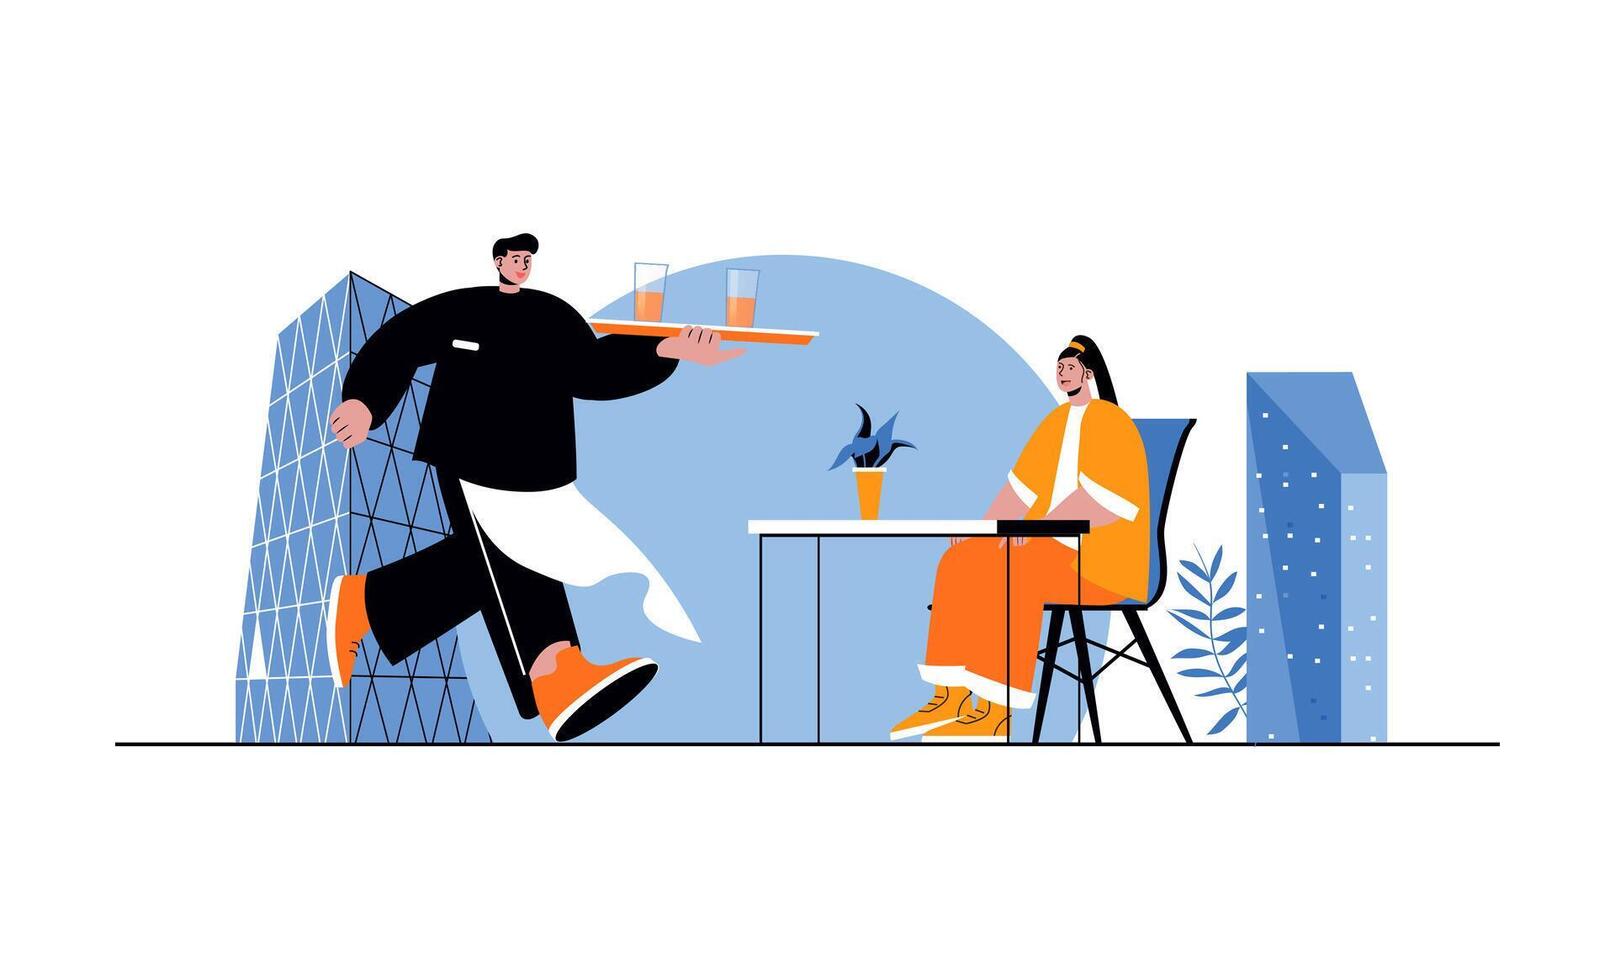 Restaurant web concept with people in flat cartoon design. Waiter carrying tray with drinks to client sitting at table in cafeteria. Vector illustration for social media banner, marketing material.